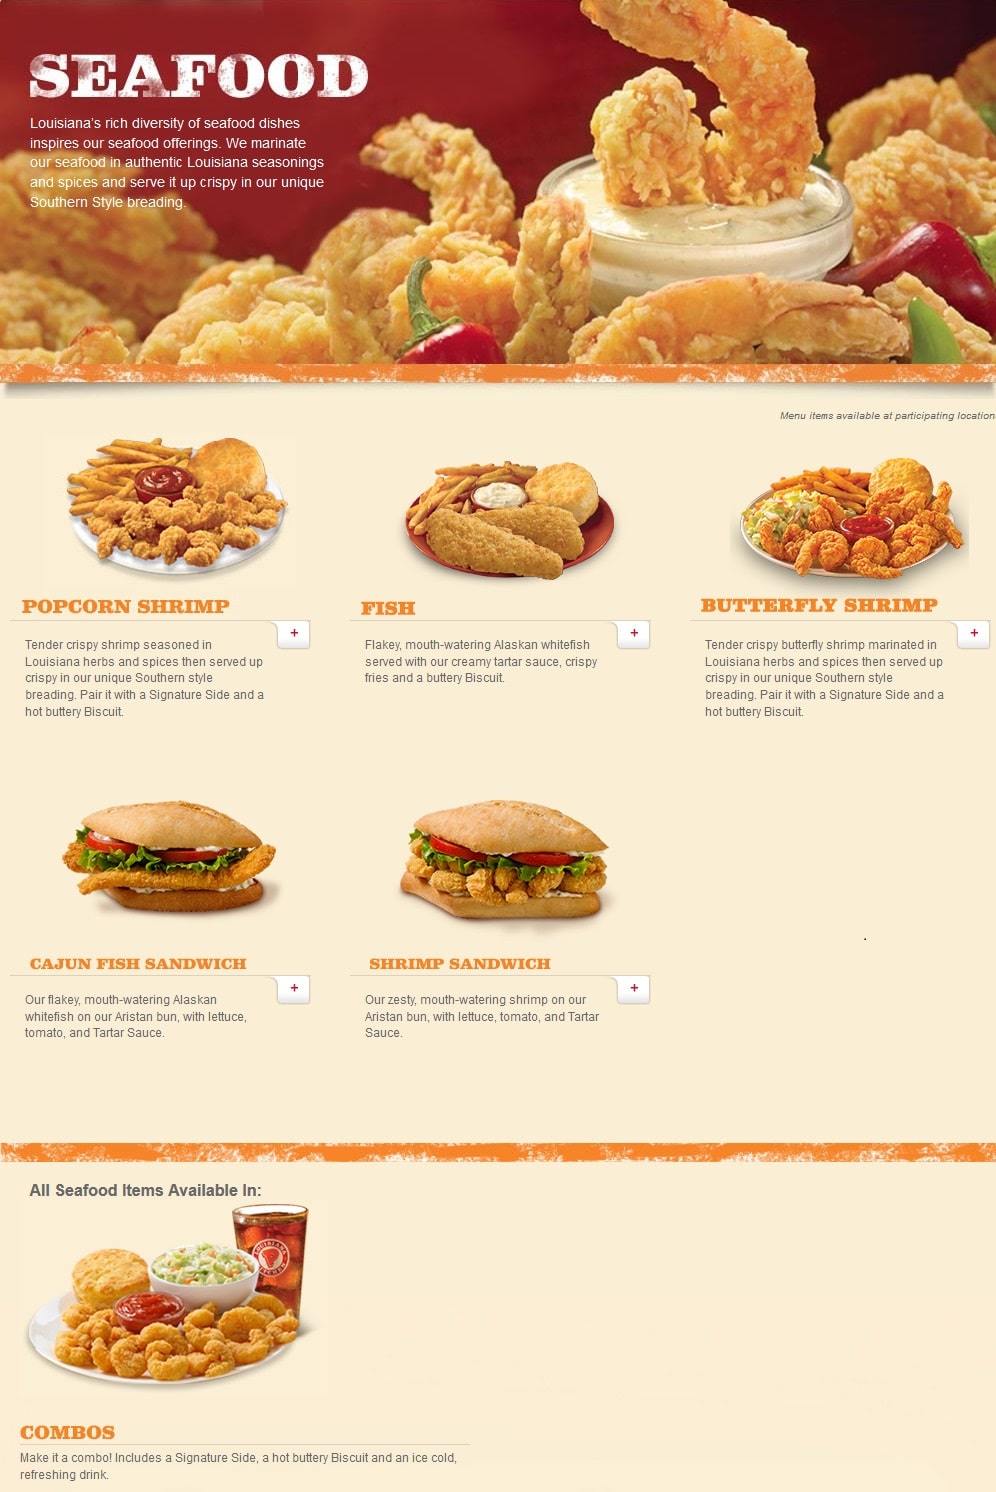 Popeyes Menu and Specials